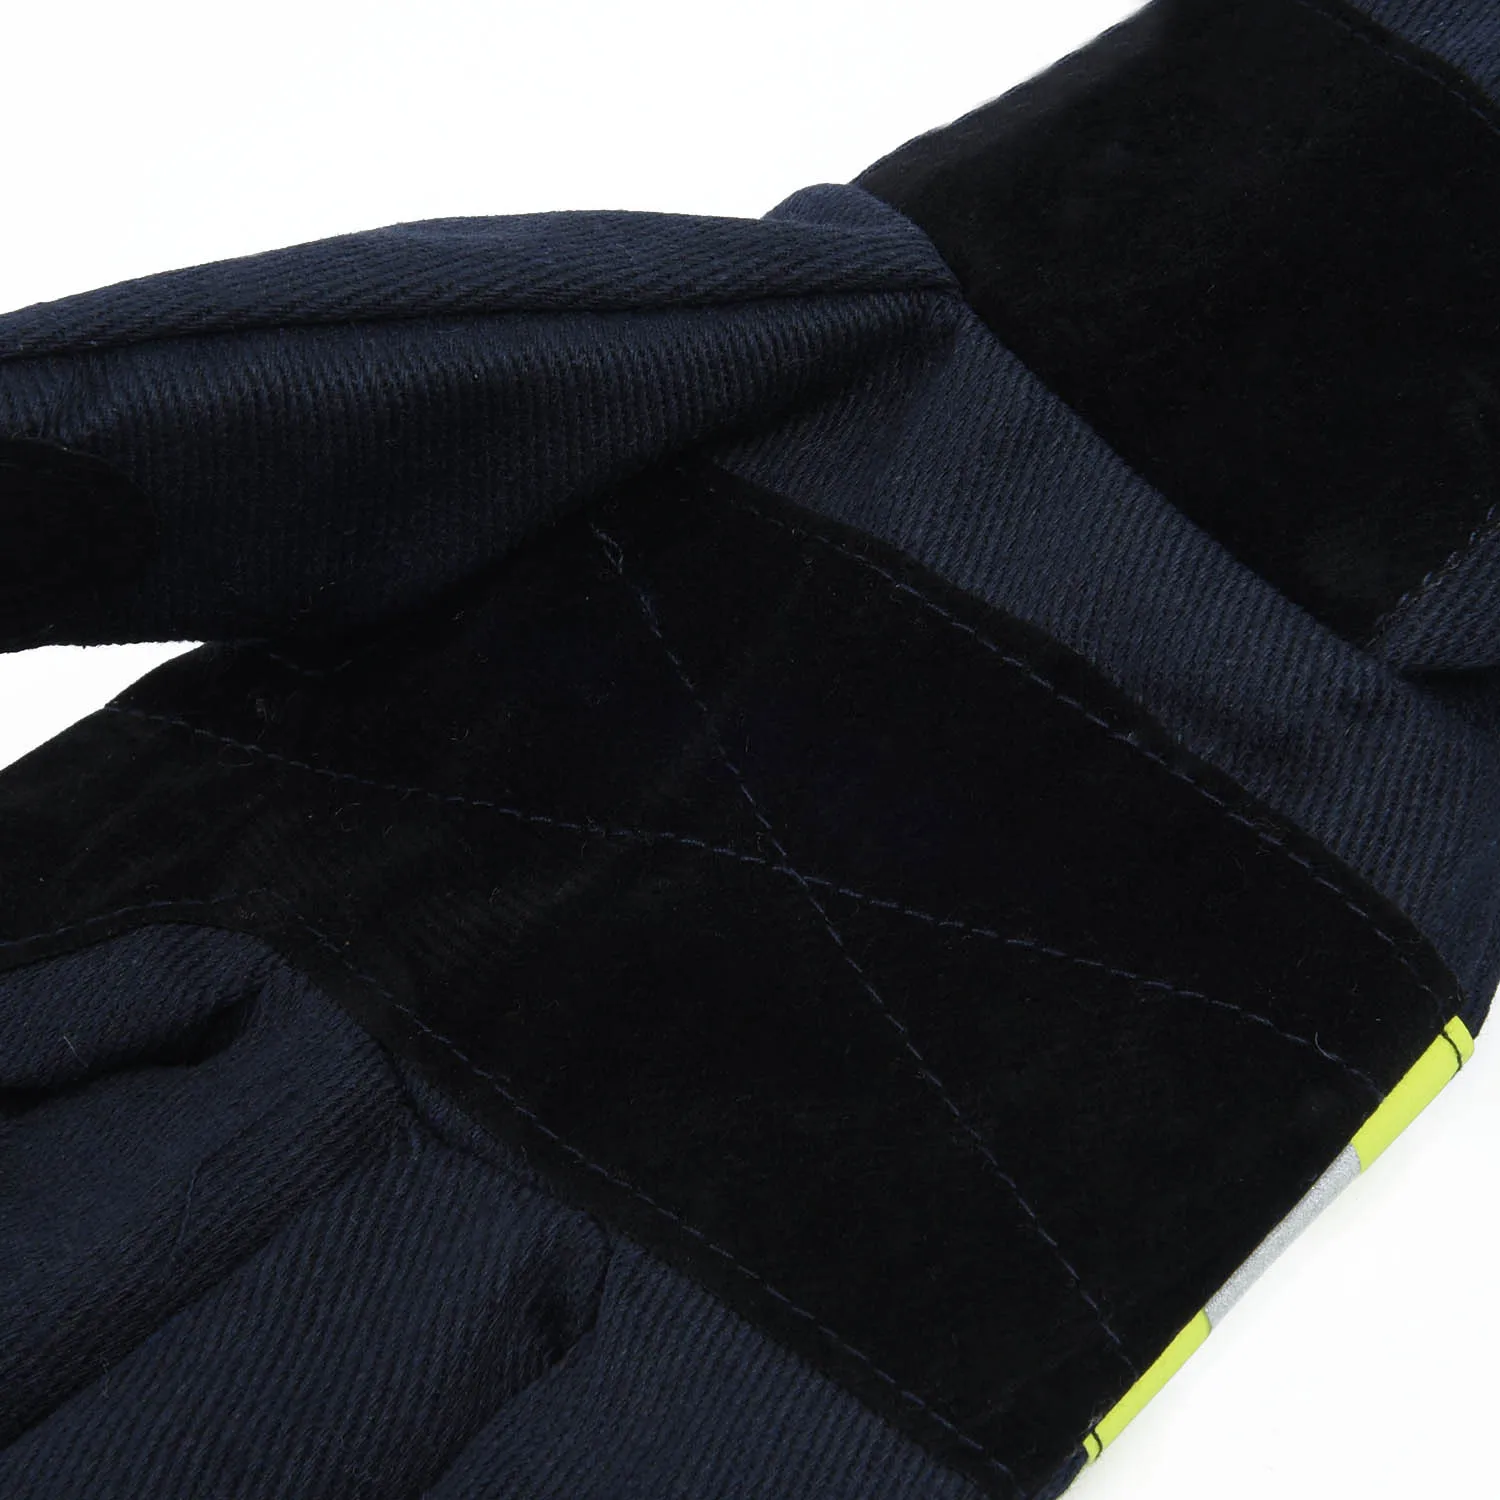 NEW Professional Anti Fire Gloves Flame Retardant For Cold Weather For Welding Heat Resistant Reflective Strap enlarge